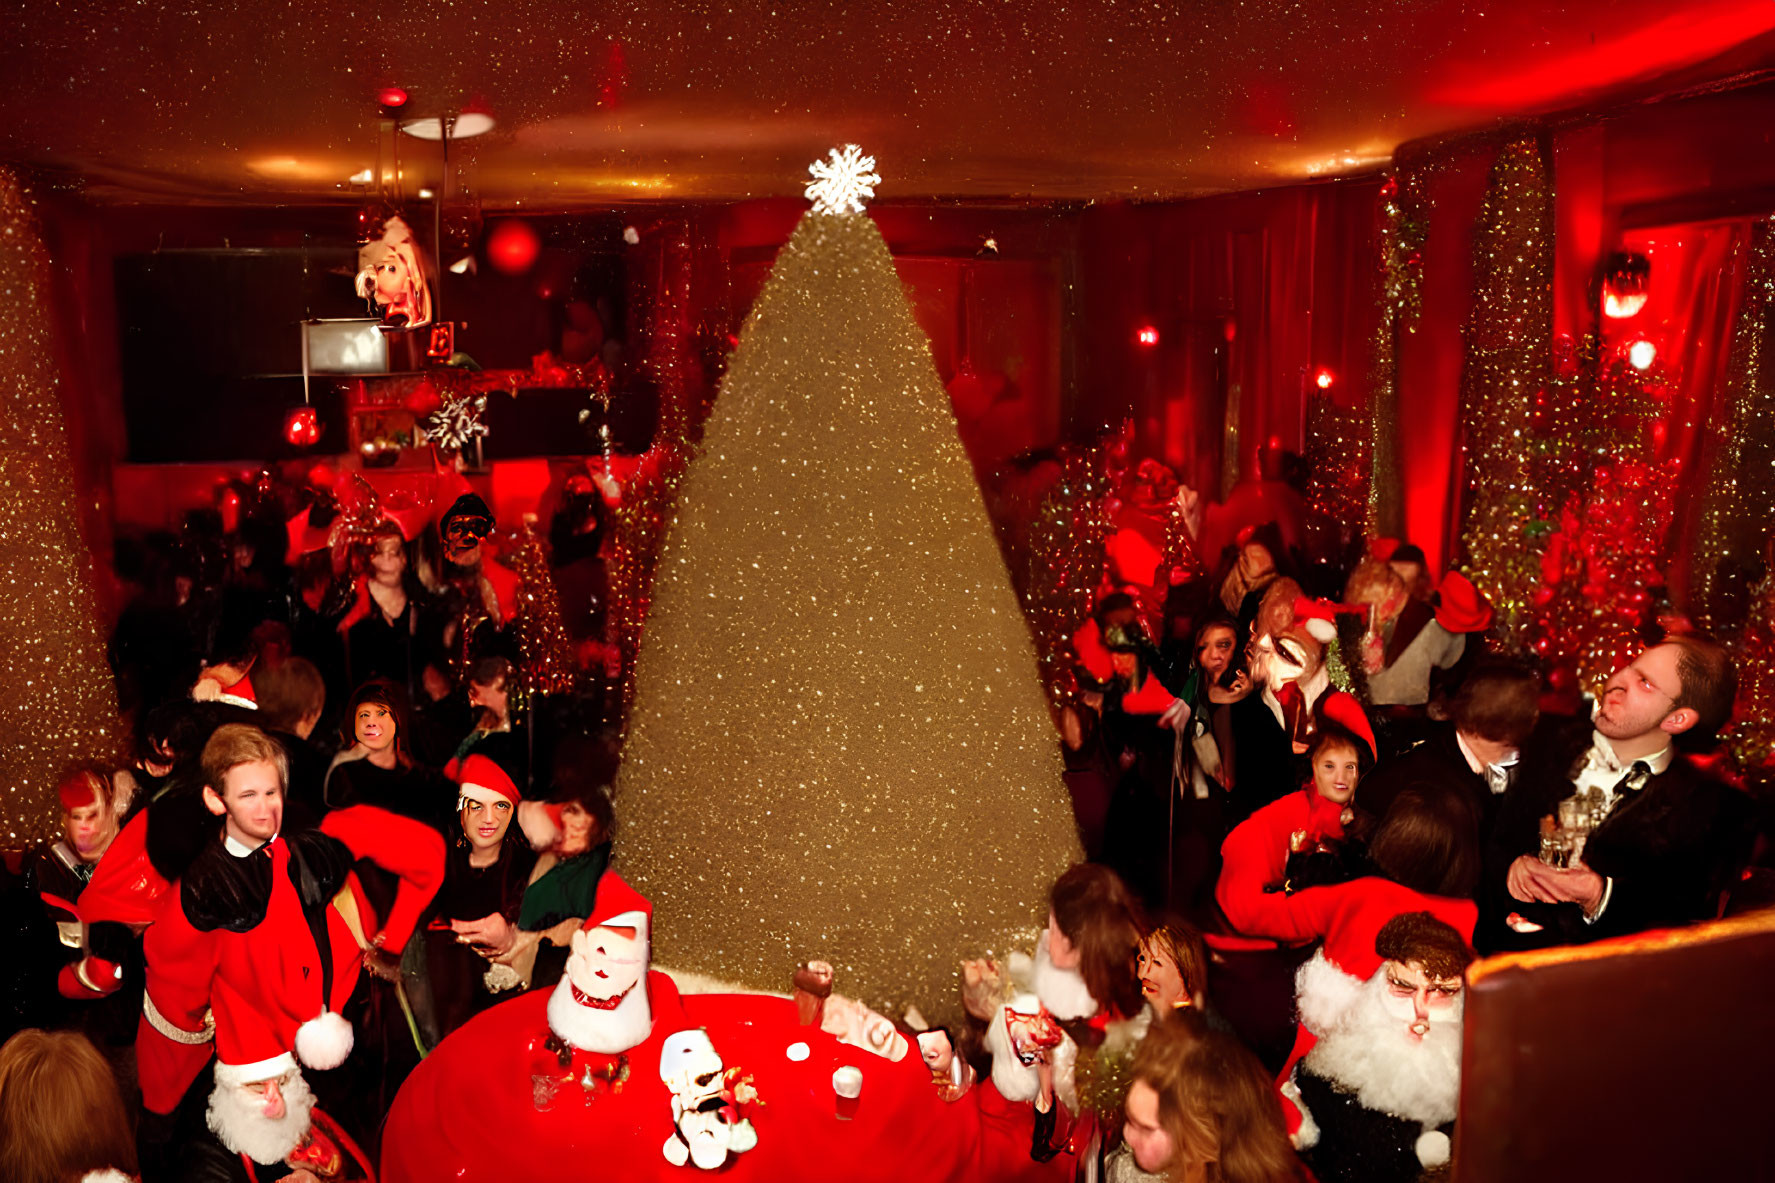 Festive crowd in Santa hats at Christmas party with large tree